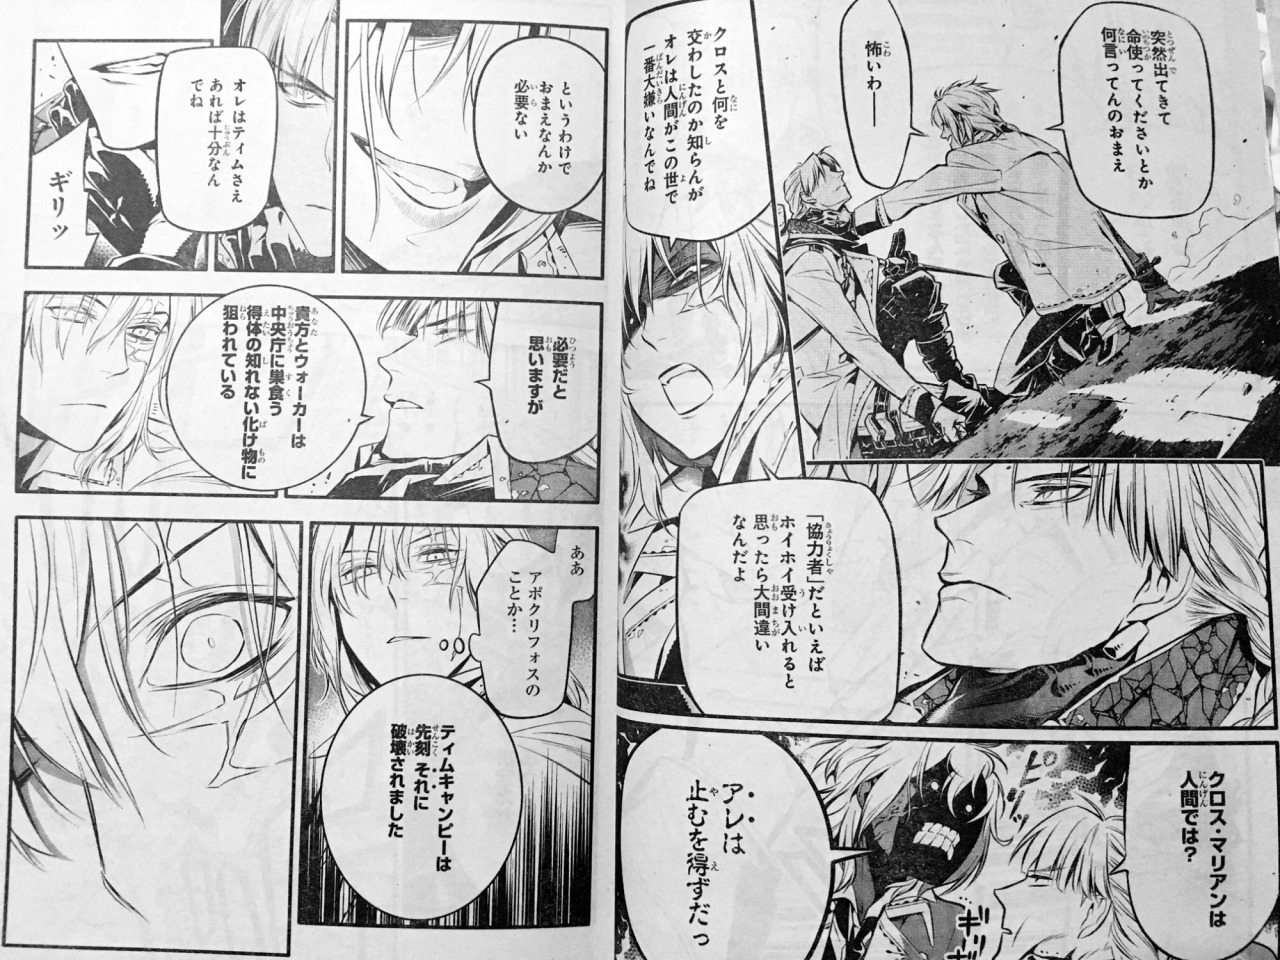 The Little Things In Life D Gray Man Chapter 223 Raw Notice Pages Should Be